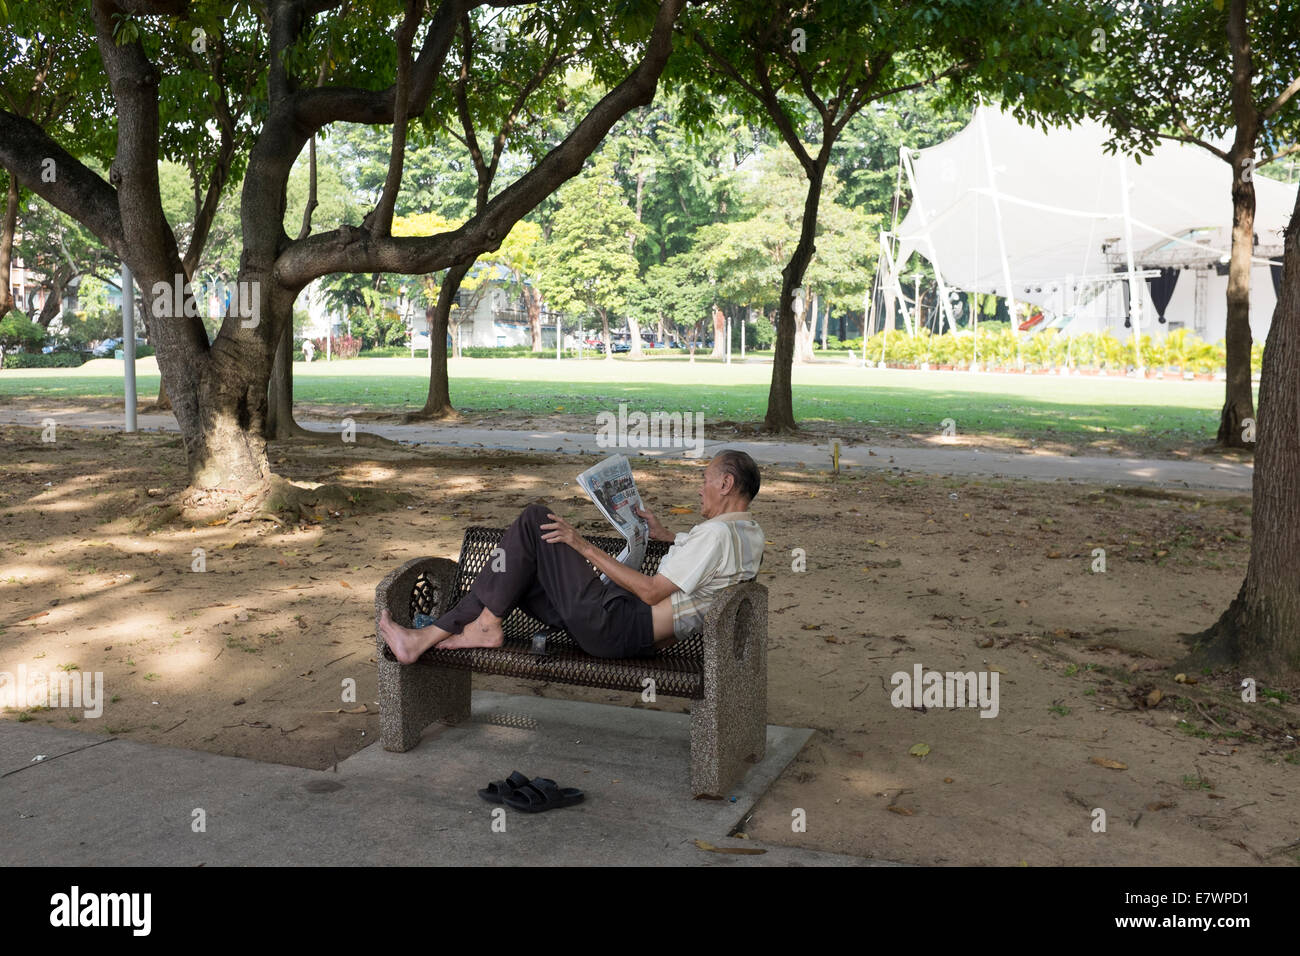 An elderly man takes reads a newspaper in a Hong Lim park in Singapore. Stock Photo